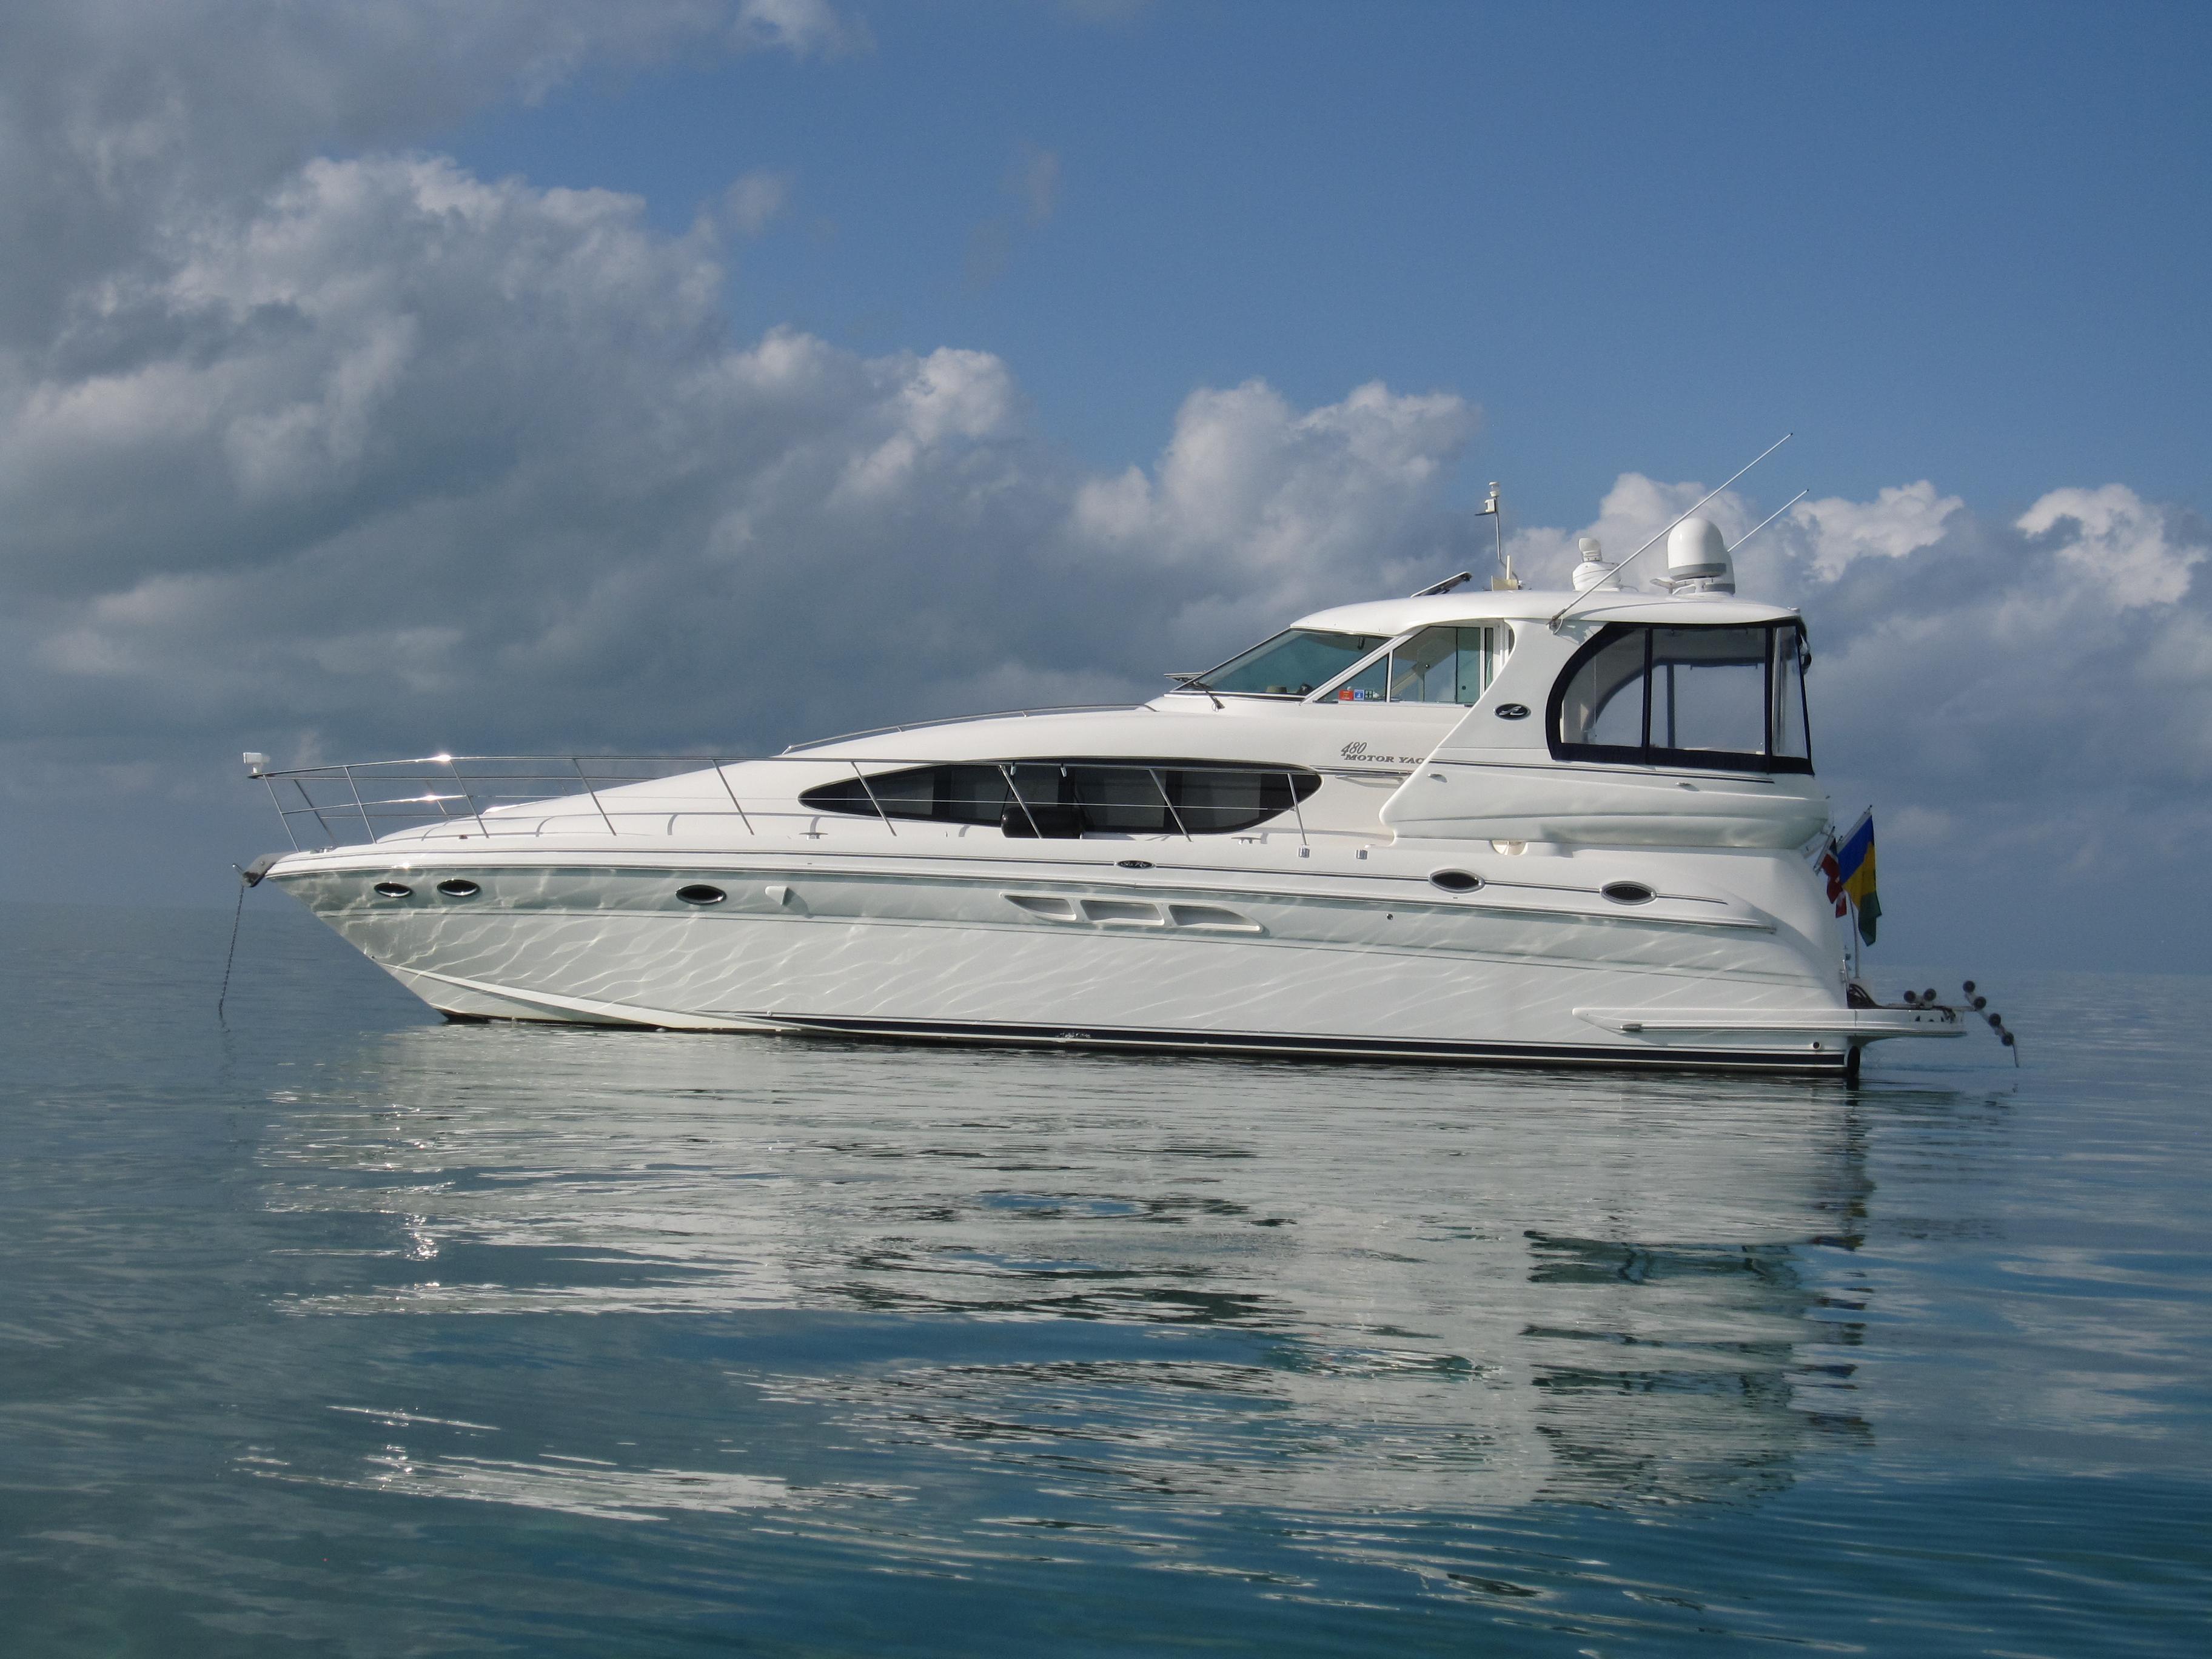 Sea Ray 480, Ft lauderdale